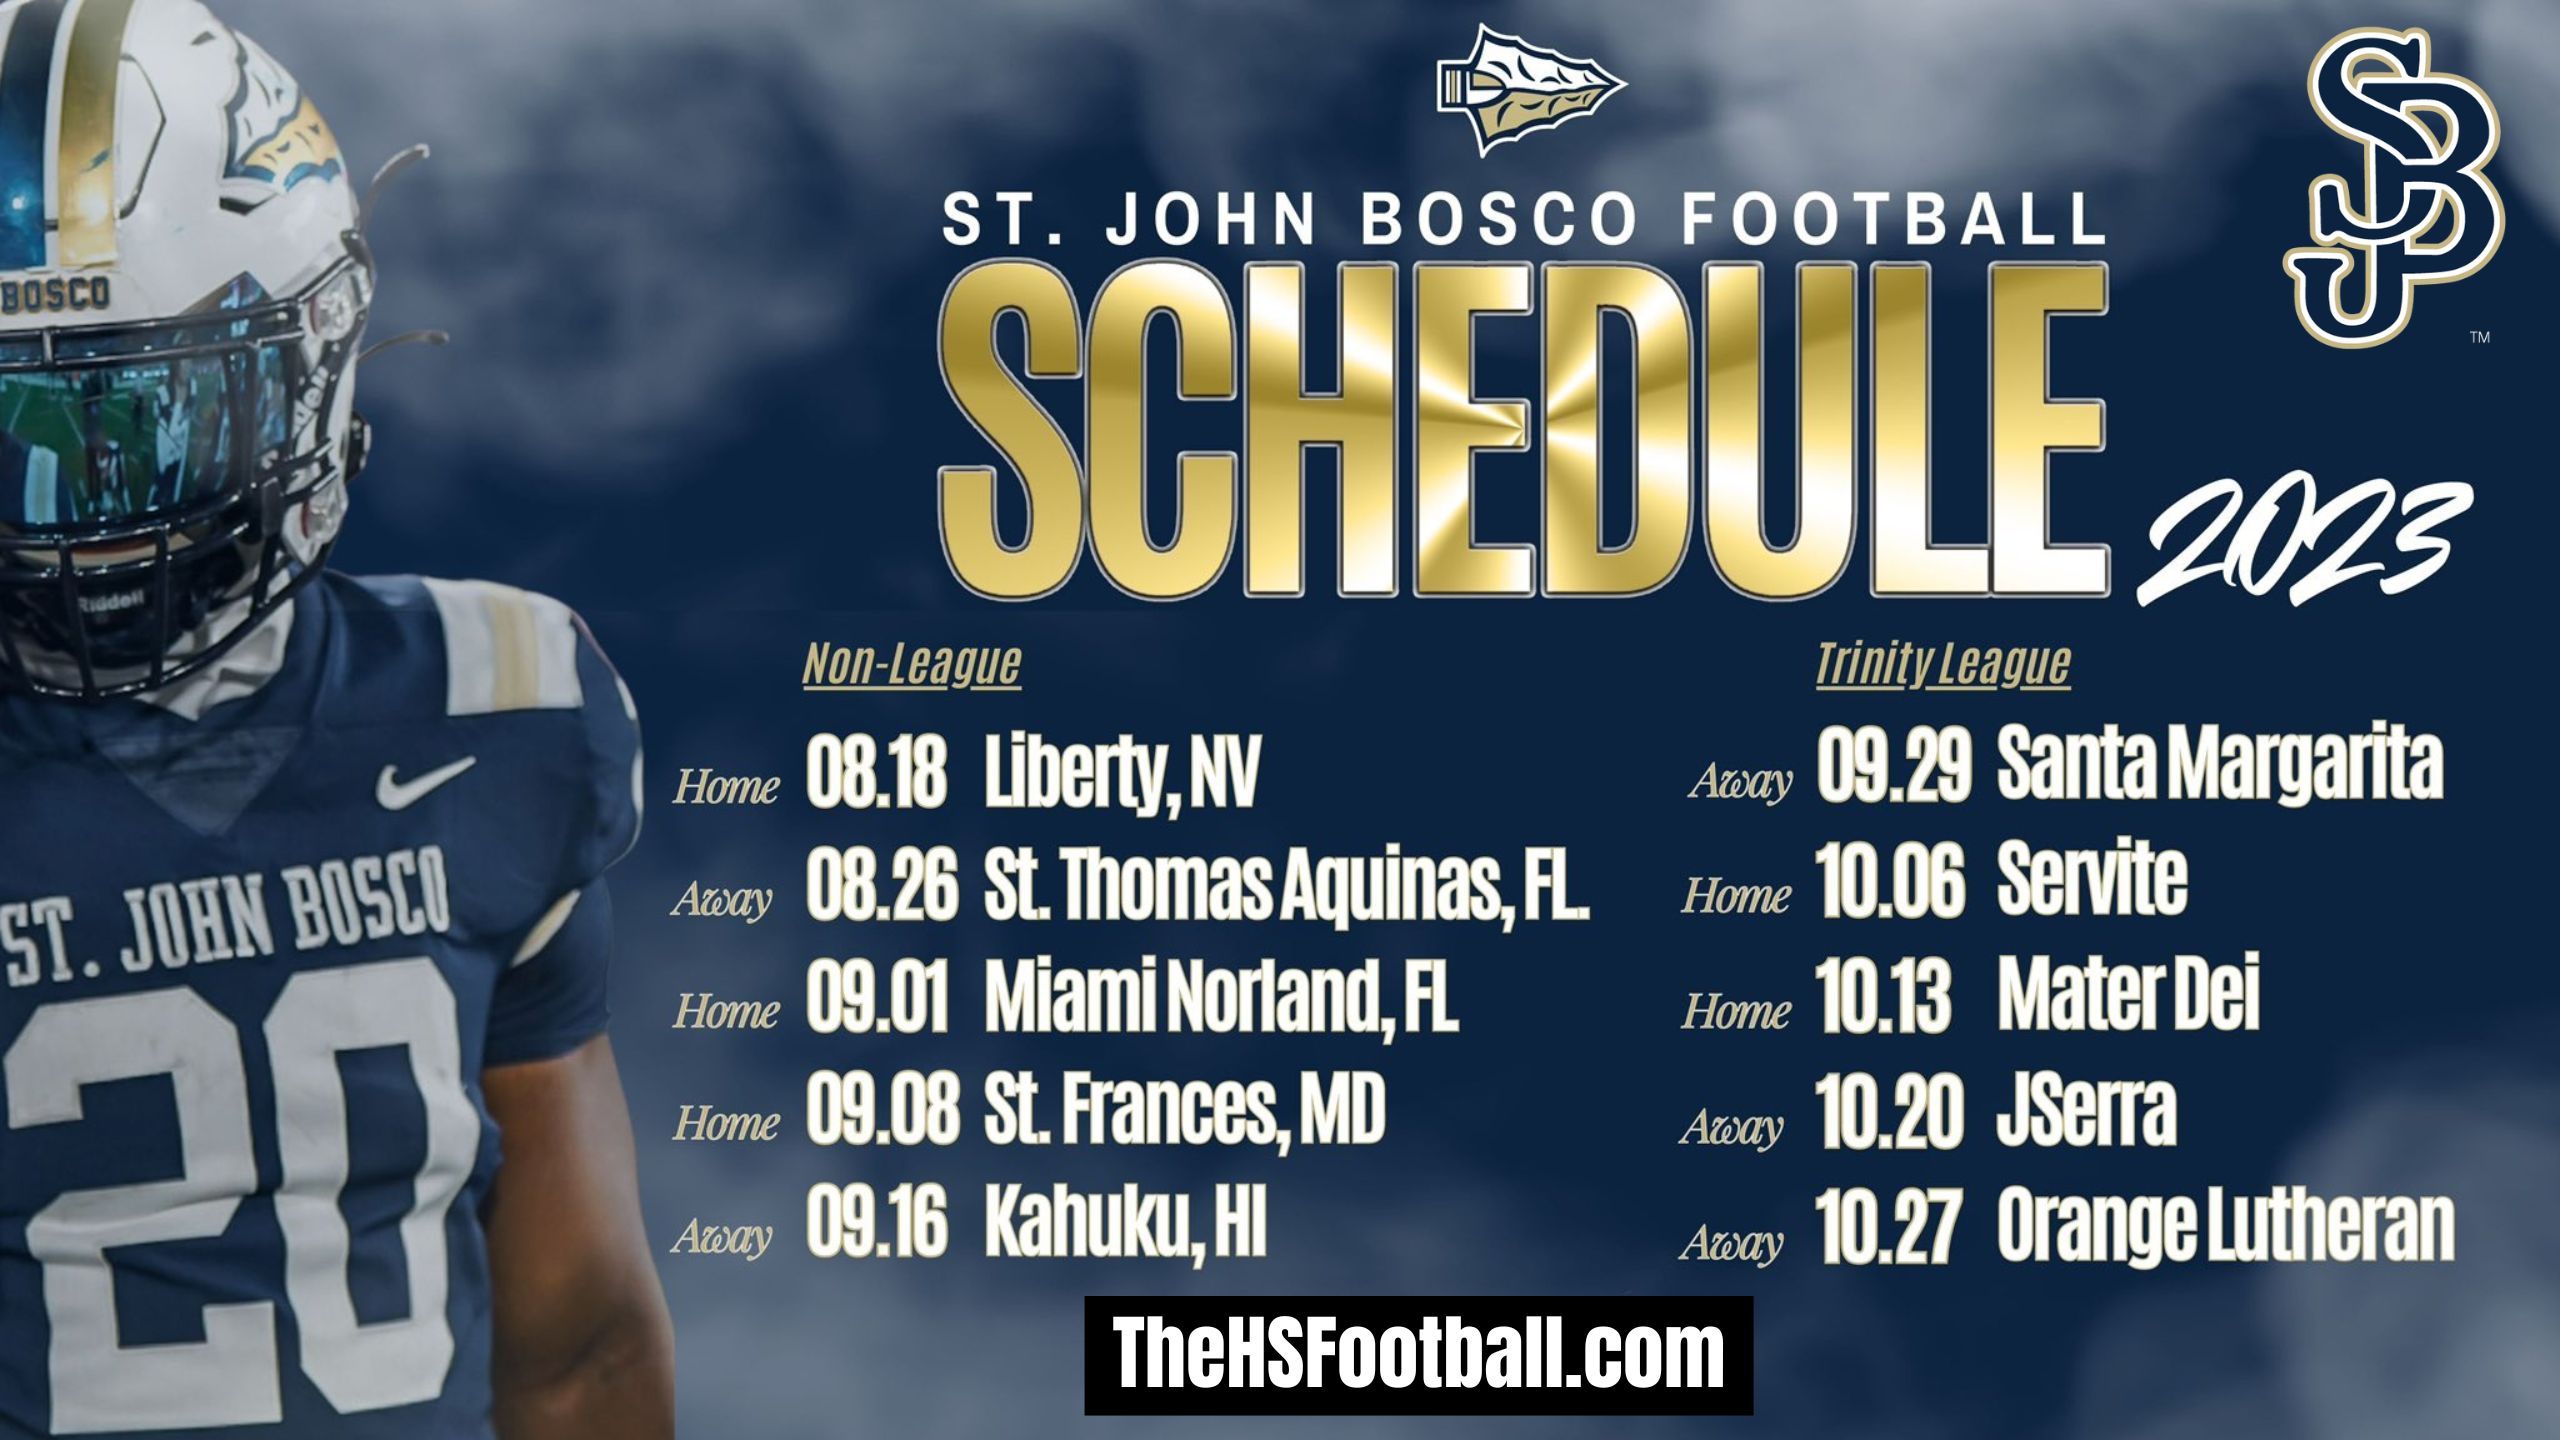 St. John Bosco 2023 schedule features games with St. Frances Academy, St. Thomas Aquinas